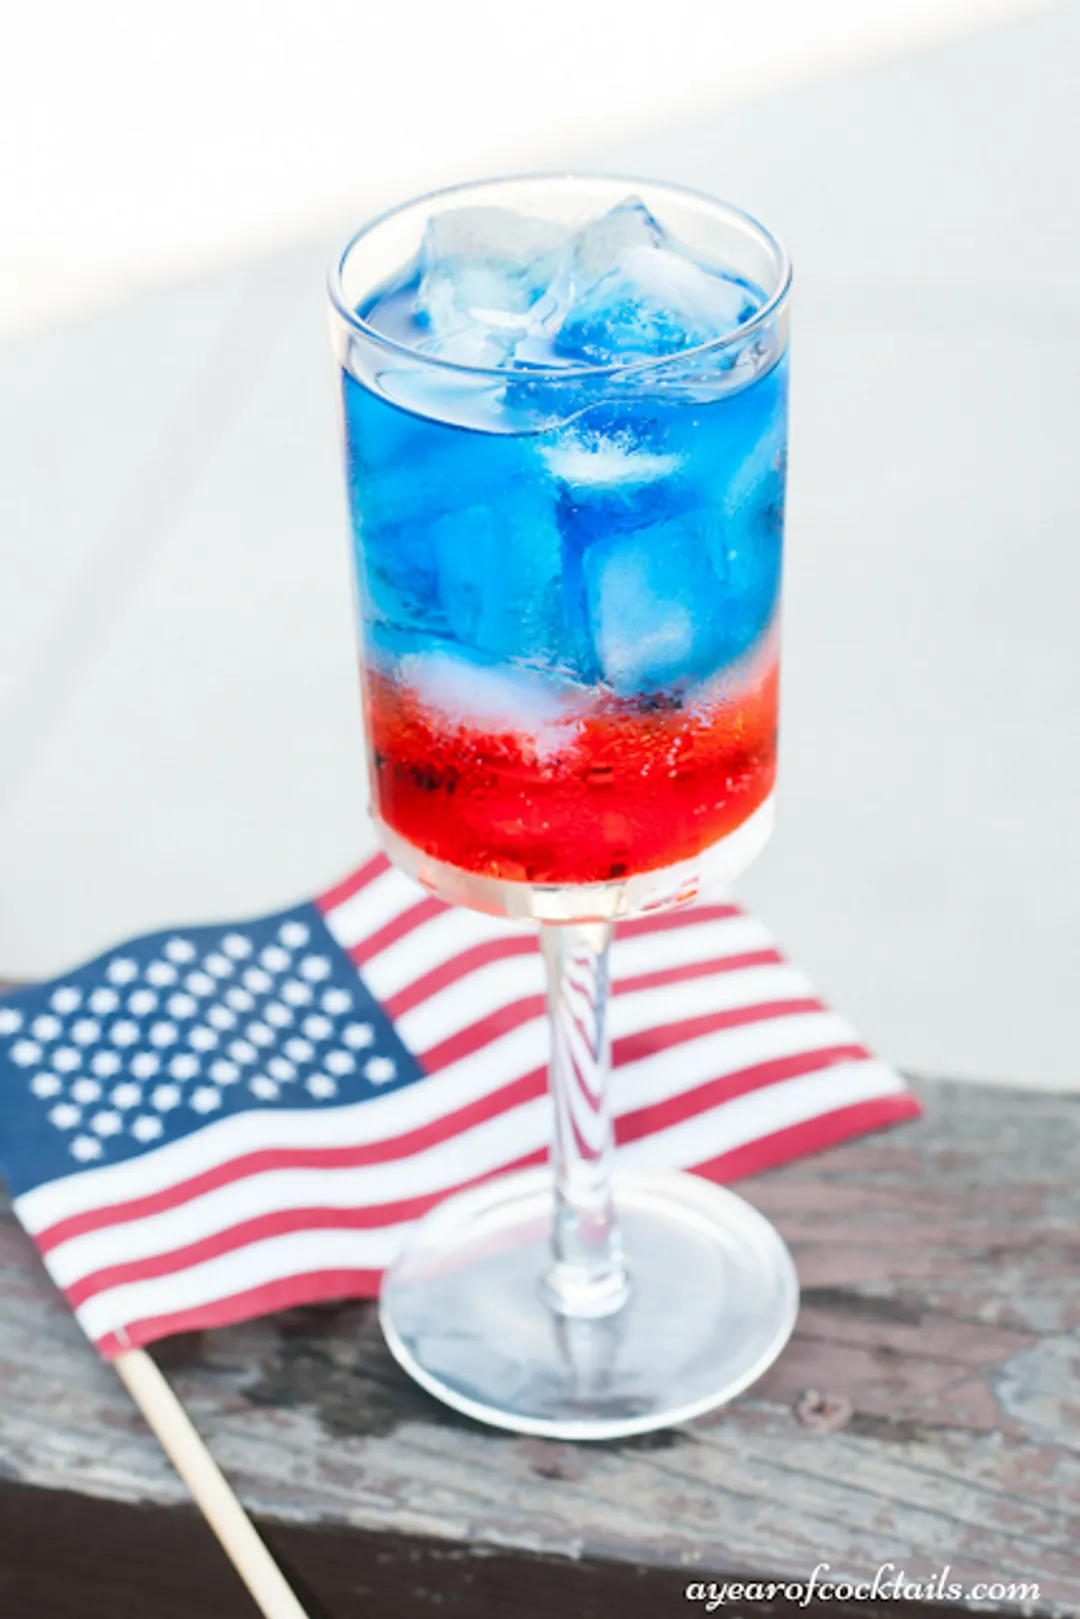 A glass filled with a bright red drink, garnished with a slice of lime and a sprig of rosemary. The flag of united state in the background